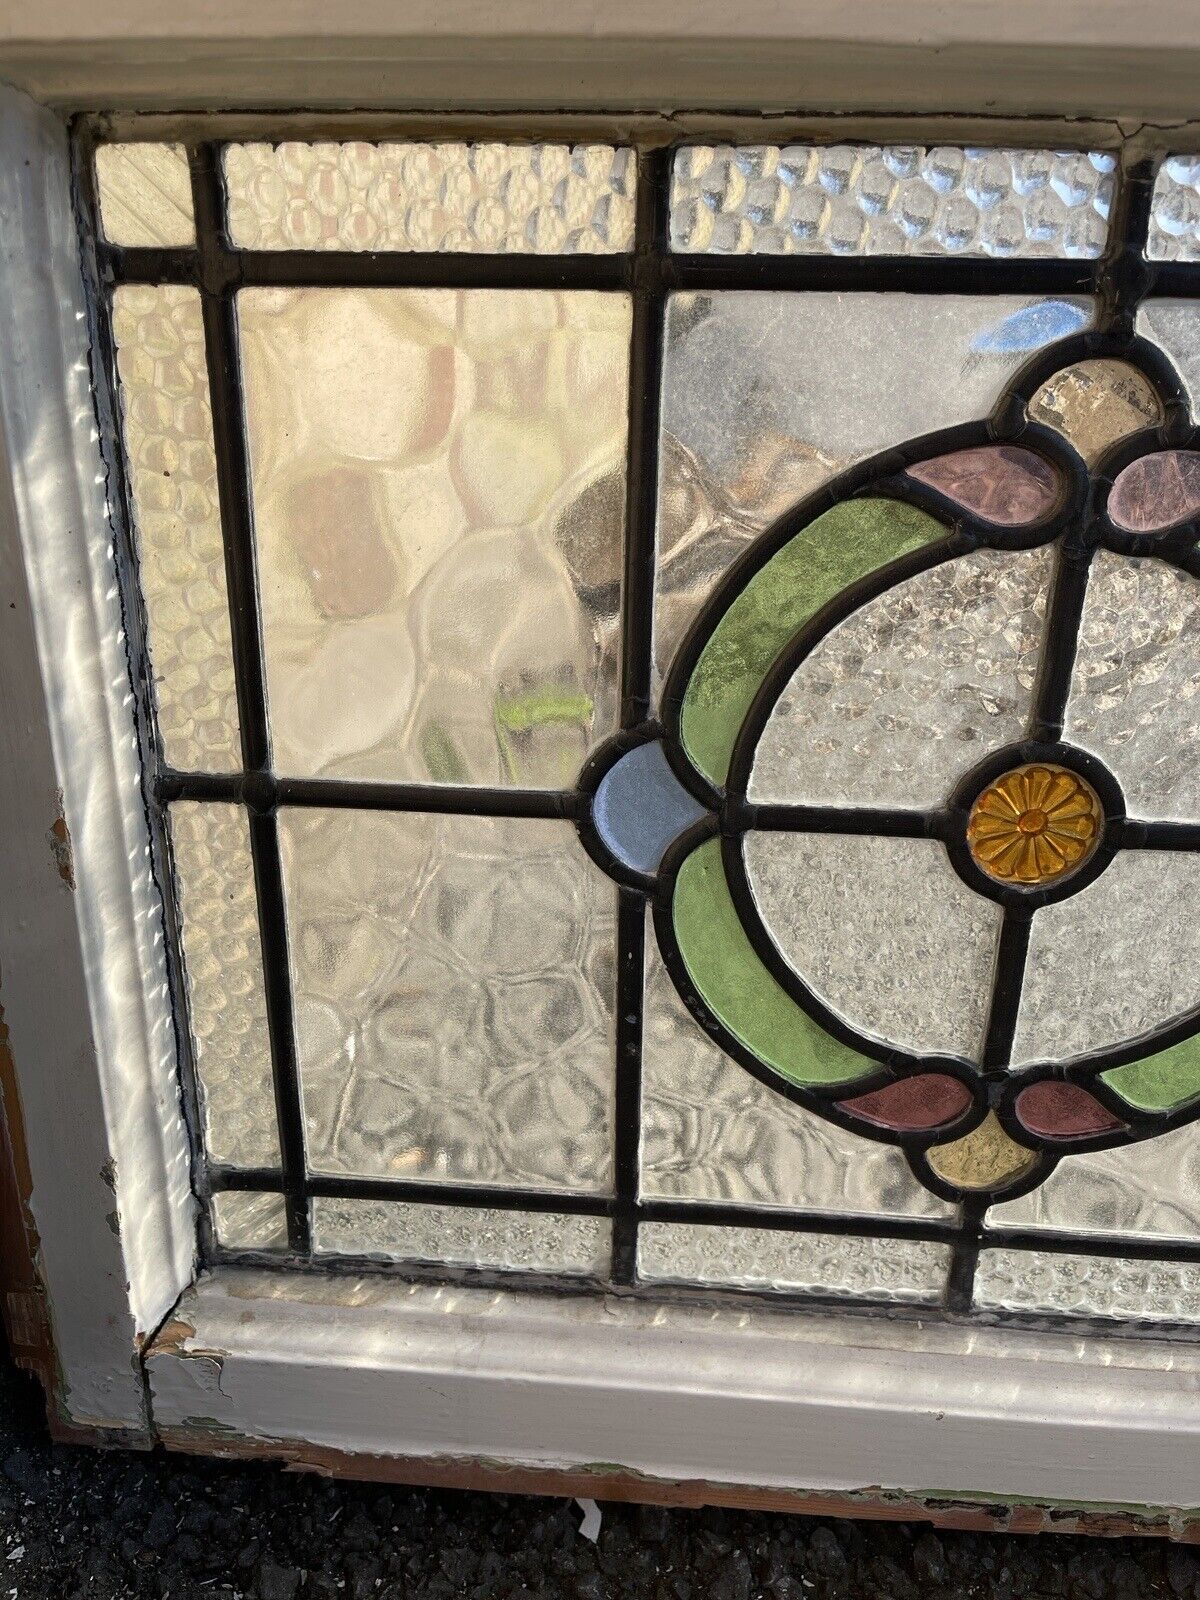 Pair Of Reclaimed Leaded Light Stained Glass Art Nouveau Wooden Window Panels